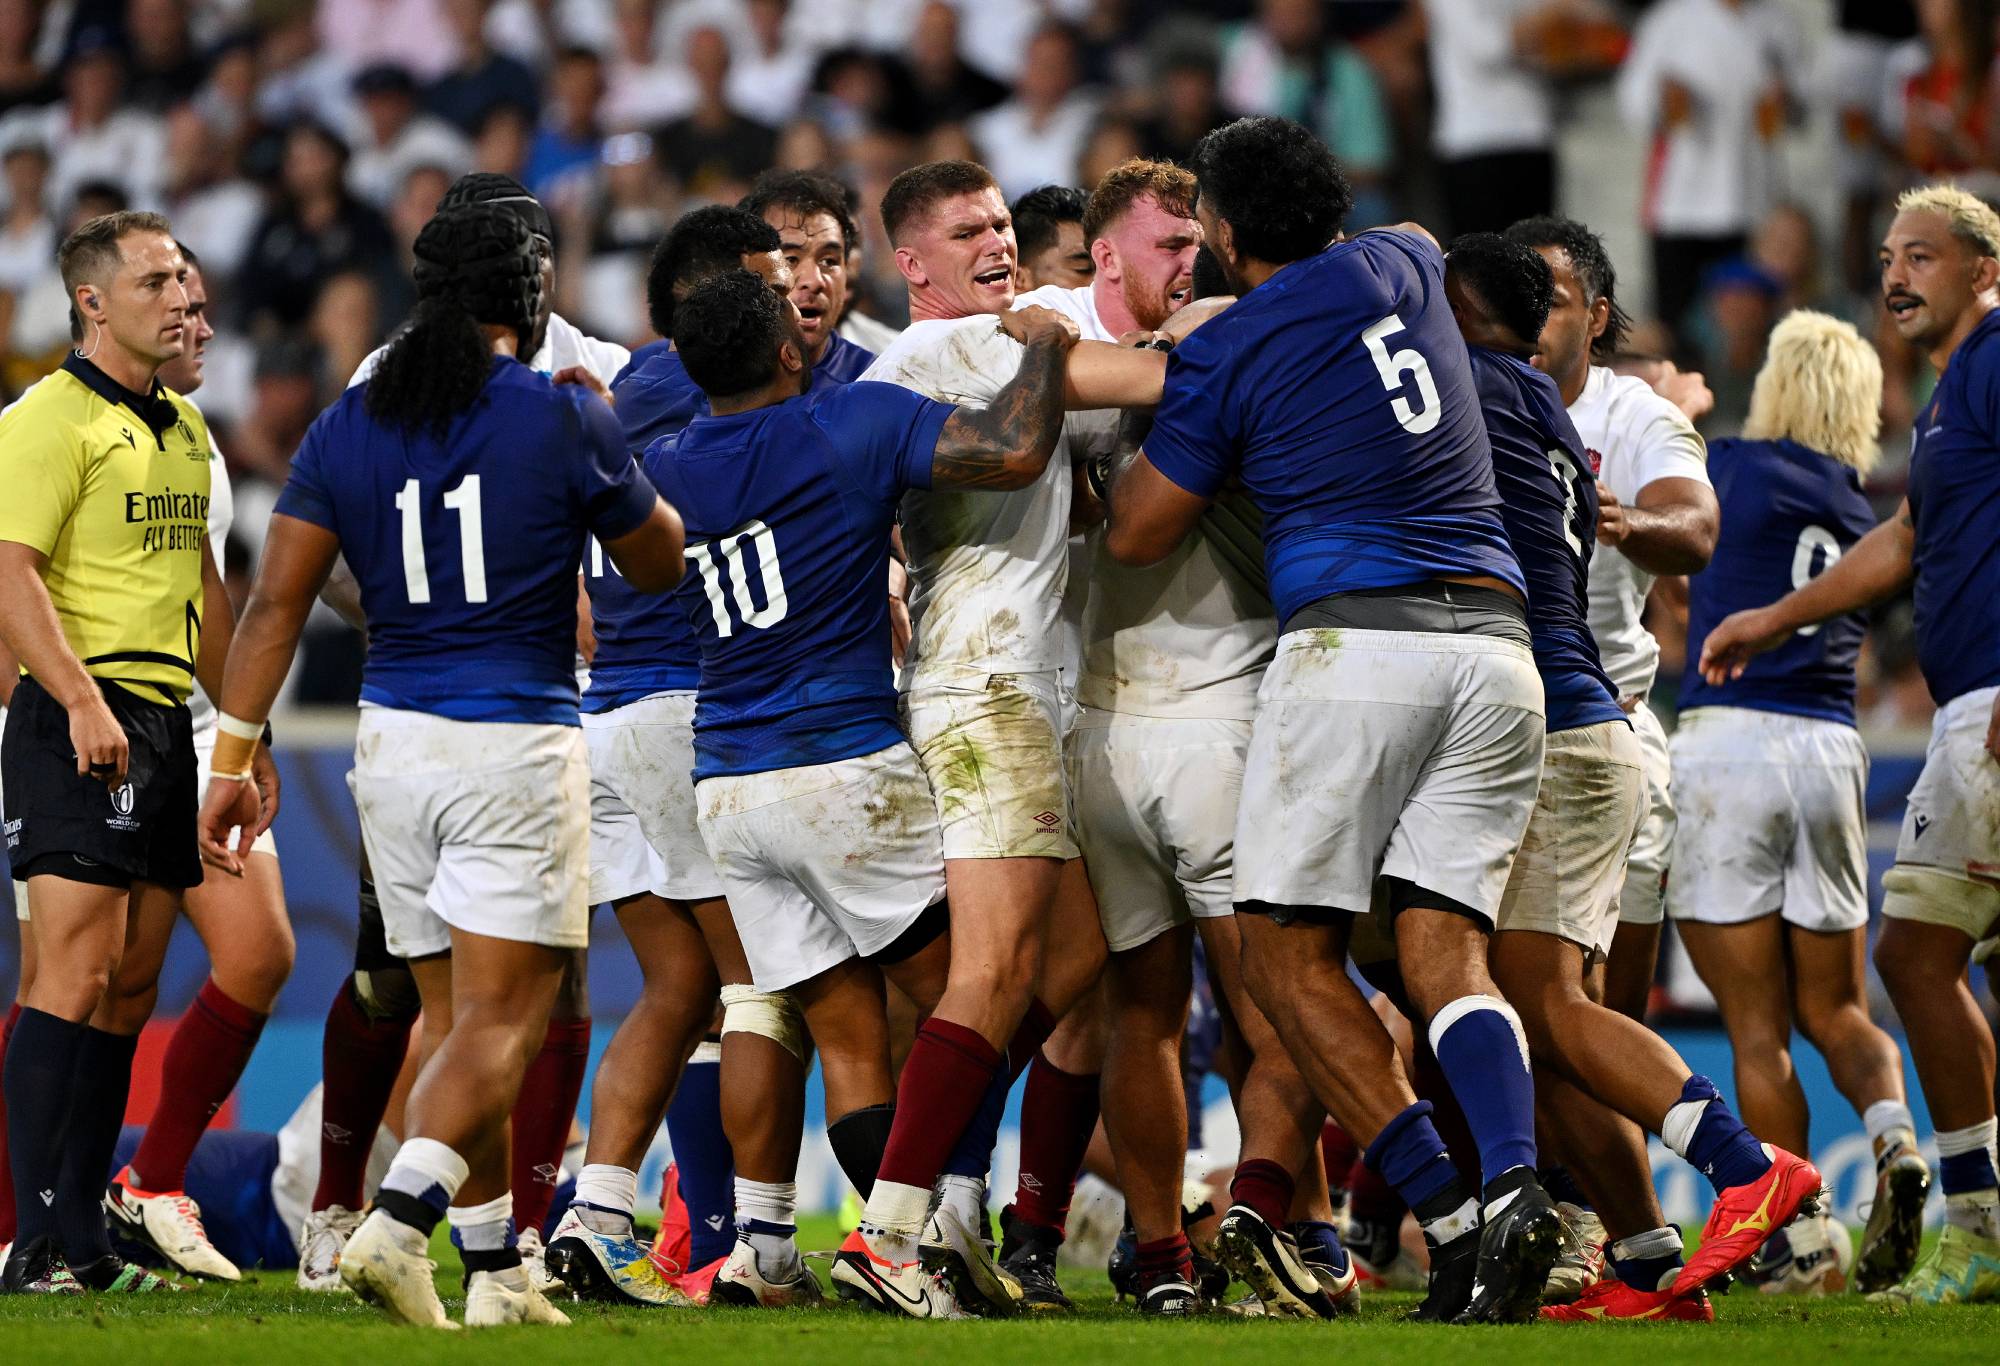 tempers flare between players of England and Samoa during the Rugby World Cup France 2023 match between England and Samoa at Stade Pierre Mauroy on October 07, 2023 in Lille, France. (Photo by Mike Hewitt/Getty Images)